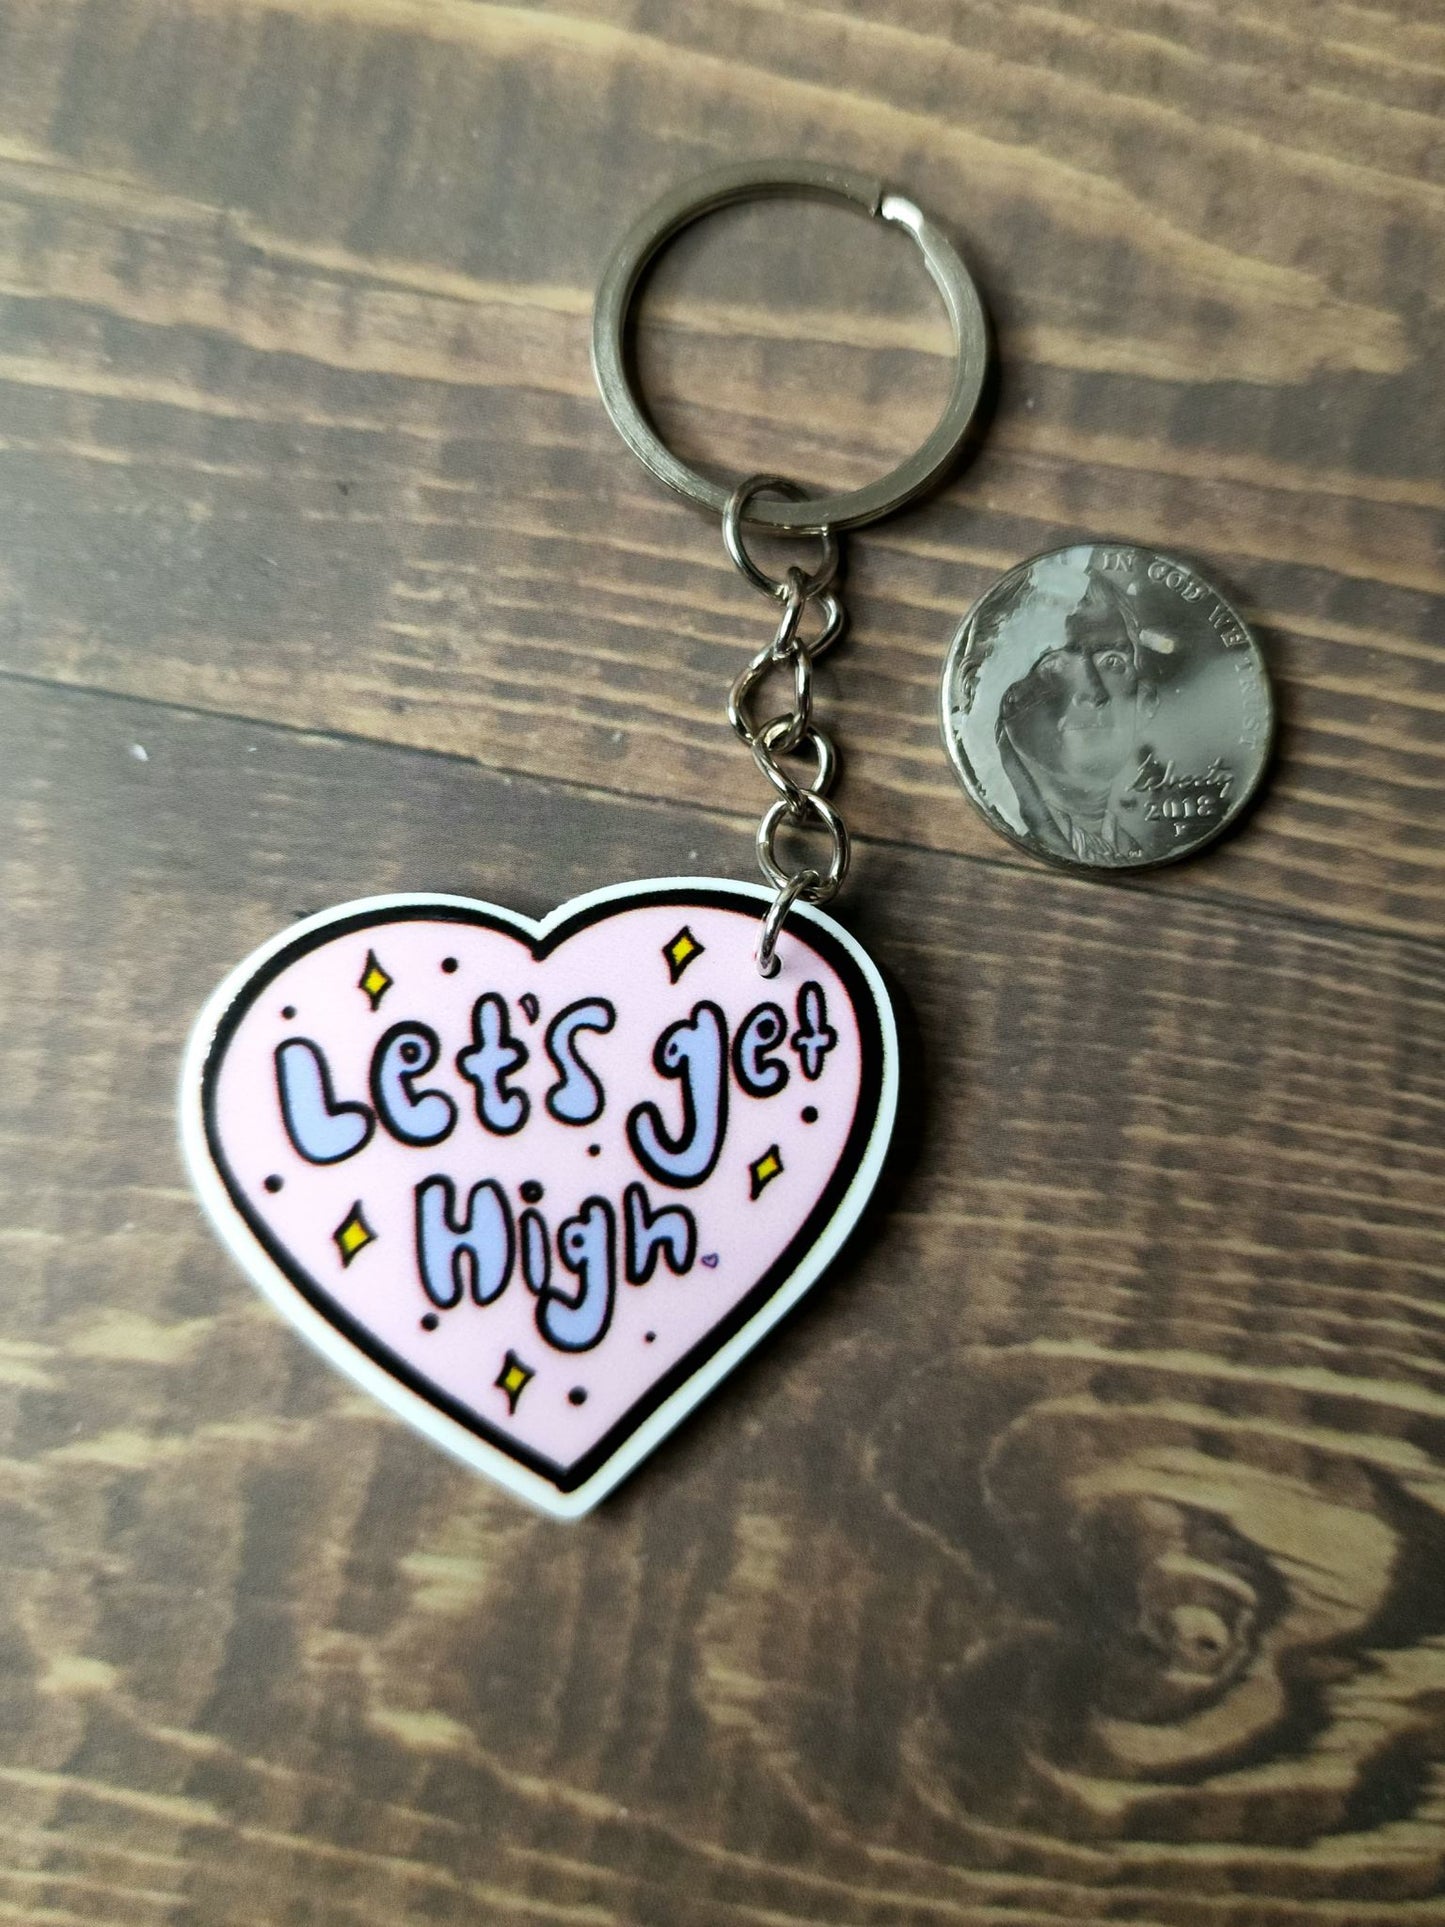 Lets Get High Keychain - Rainy Morning Candles 